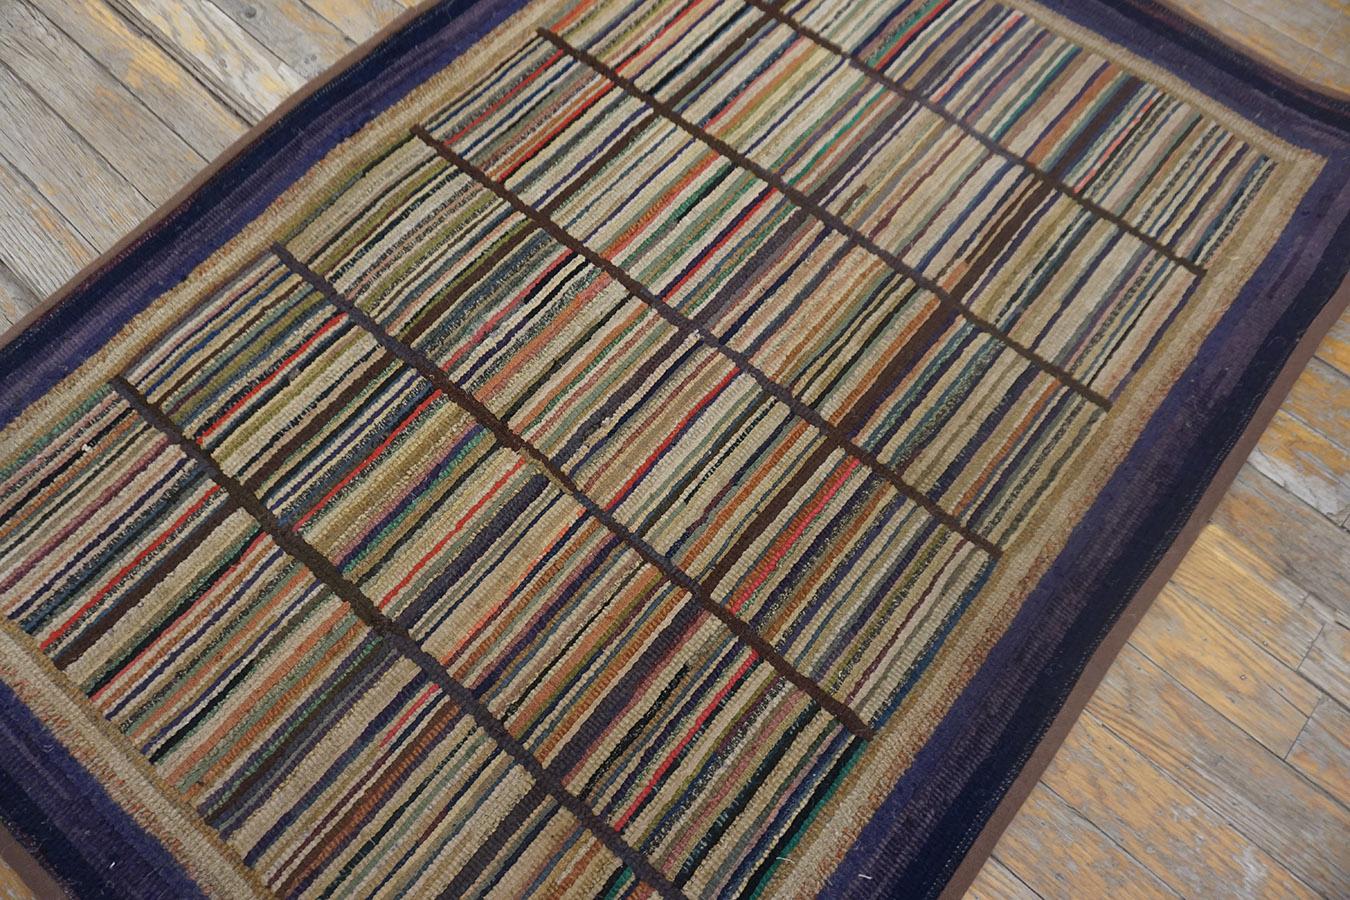 Early 20th Century American Hooked Rug ( 2'7